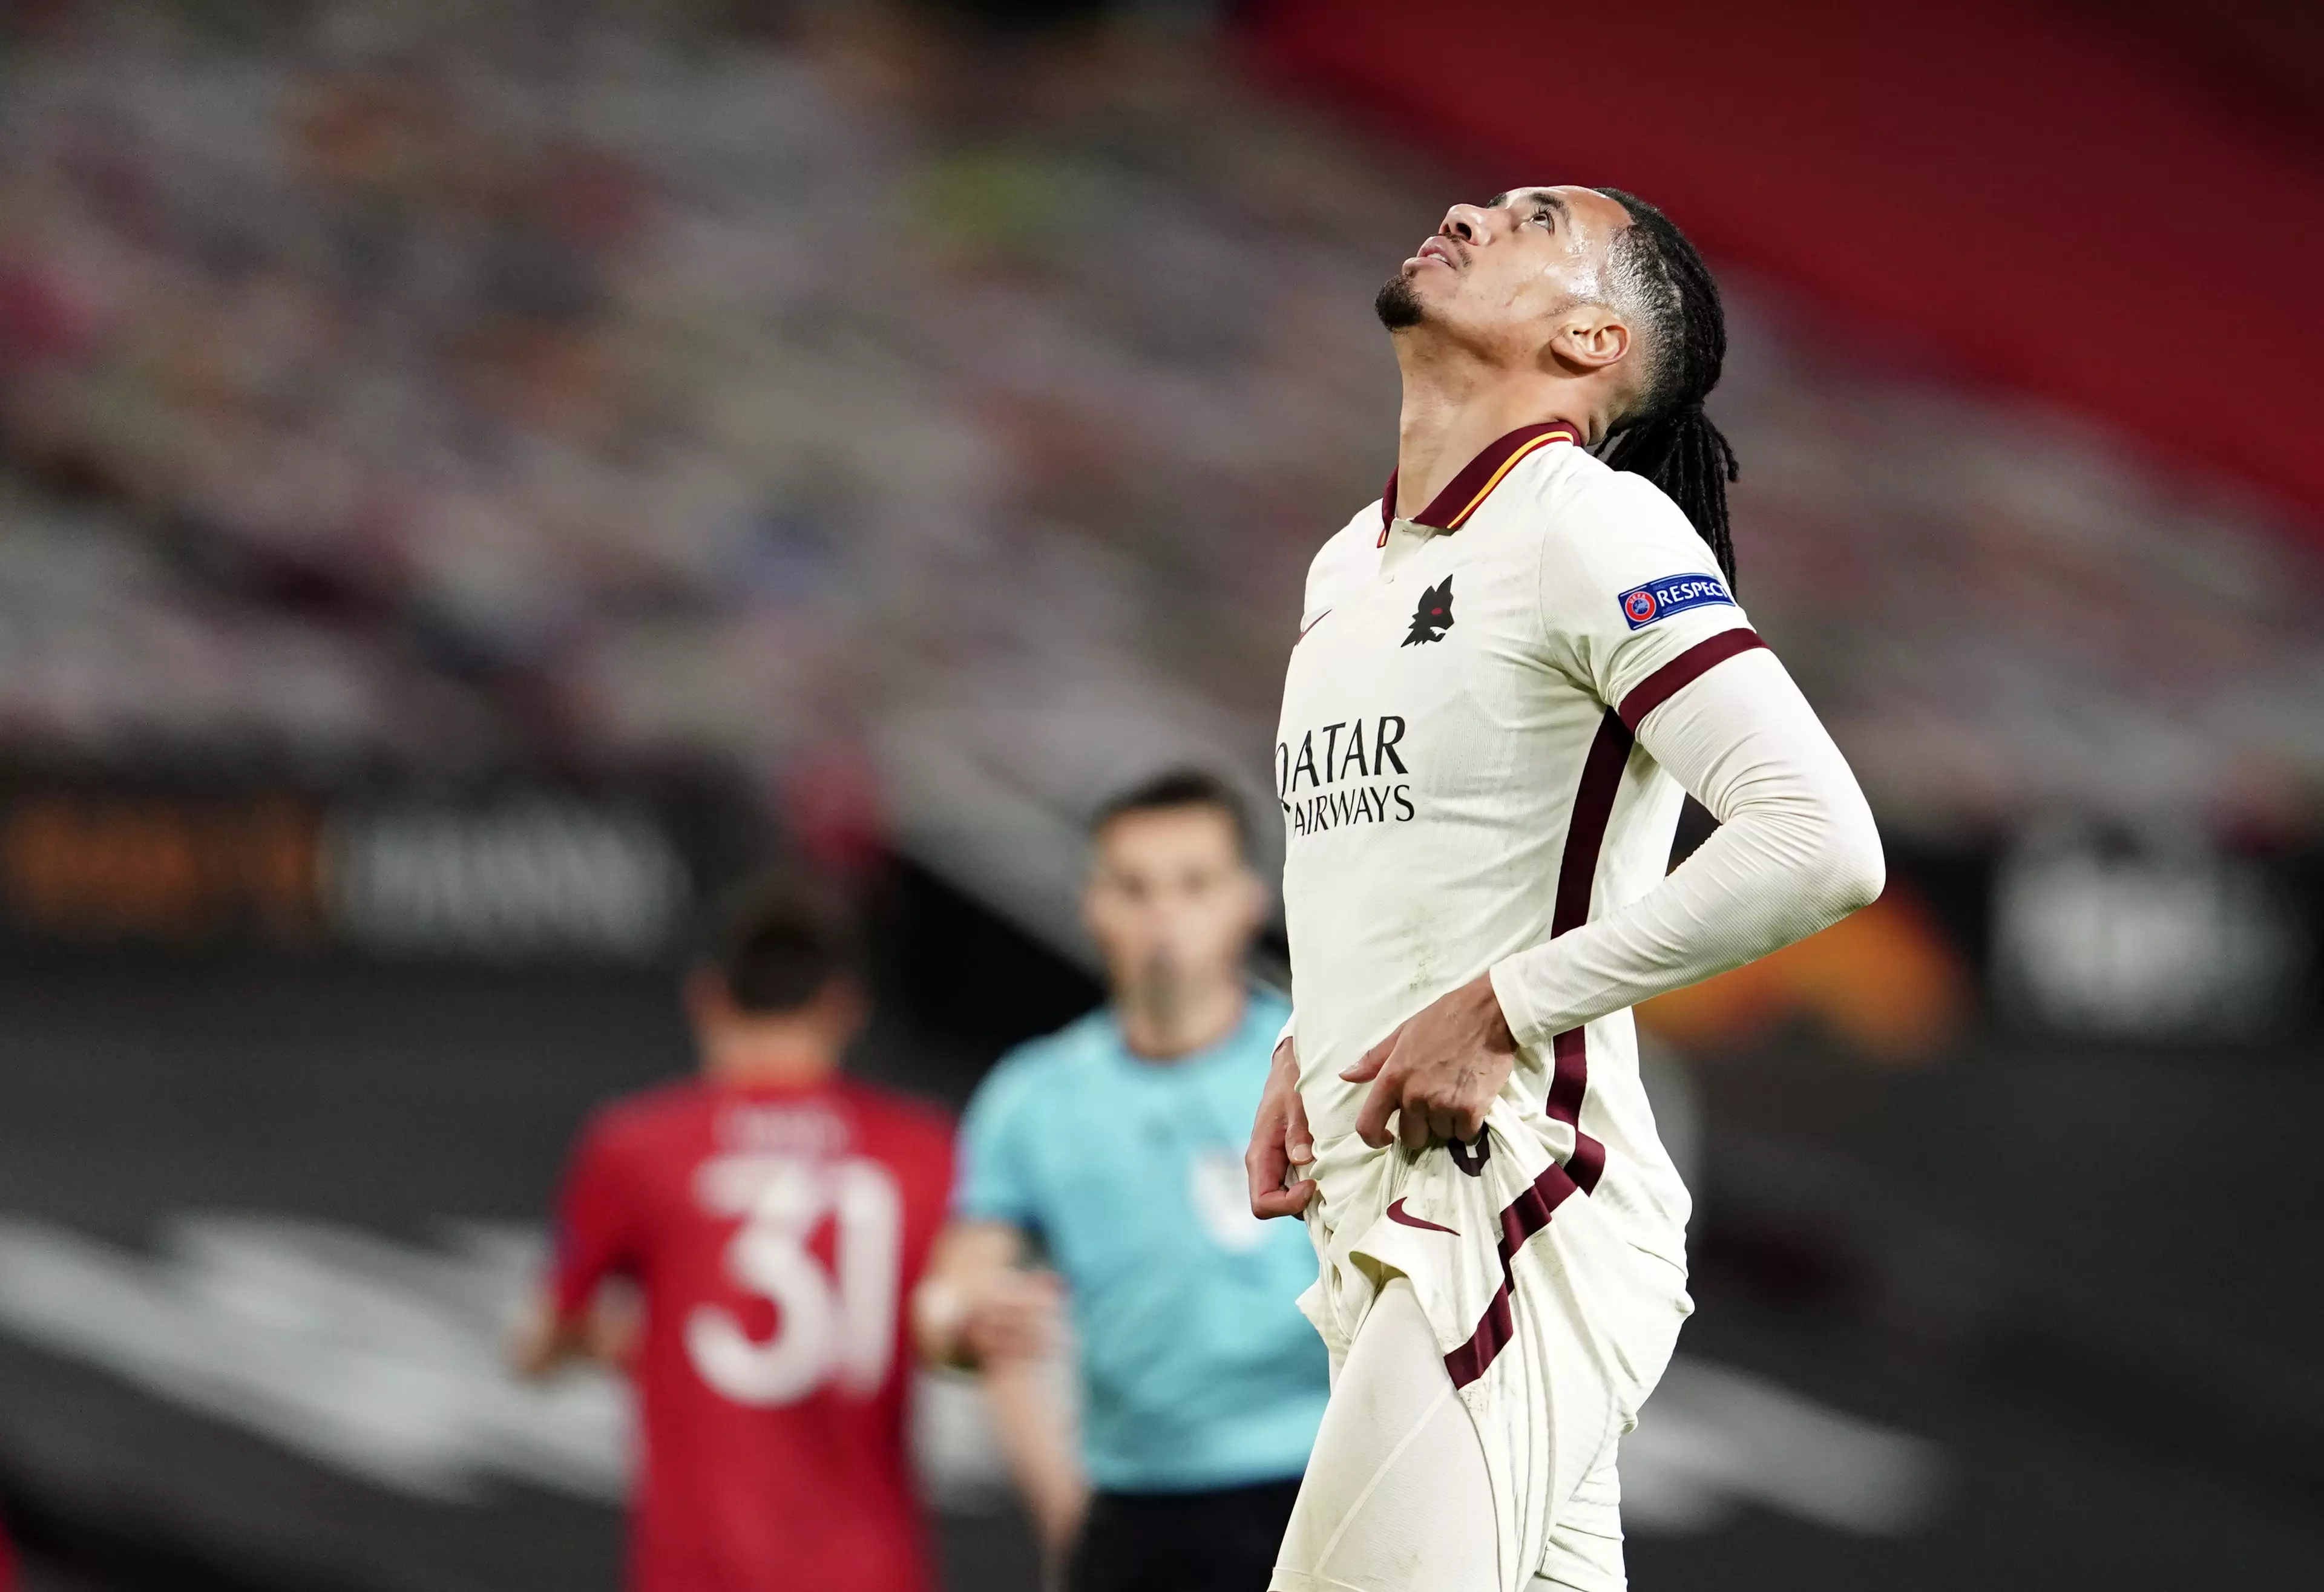 Smalling reacting to the news (or reacting during Roma's loss to United last week). Image: PA Images